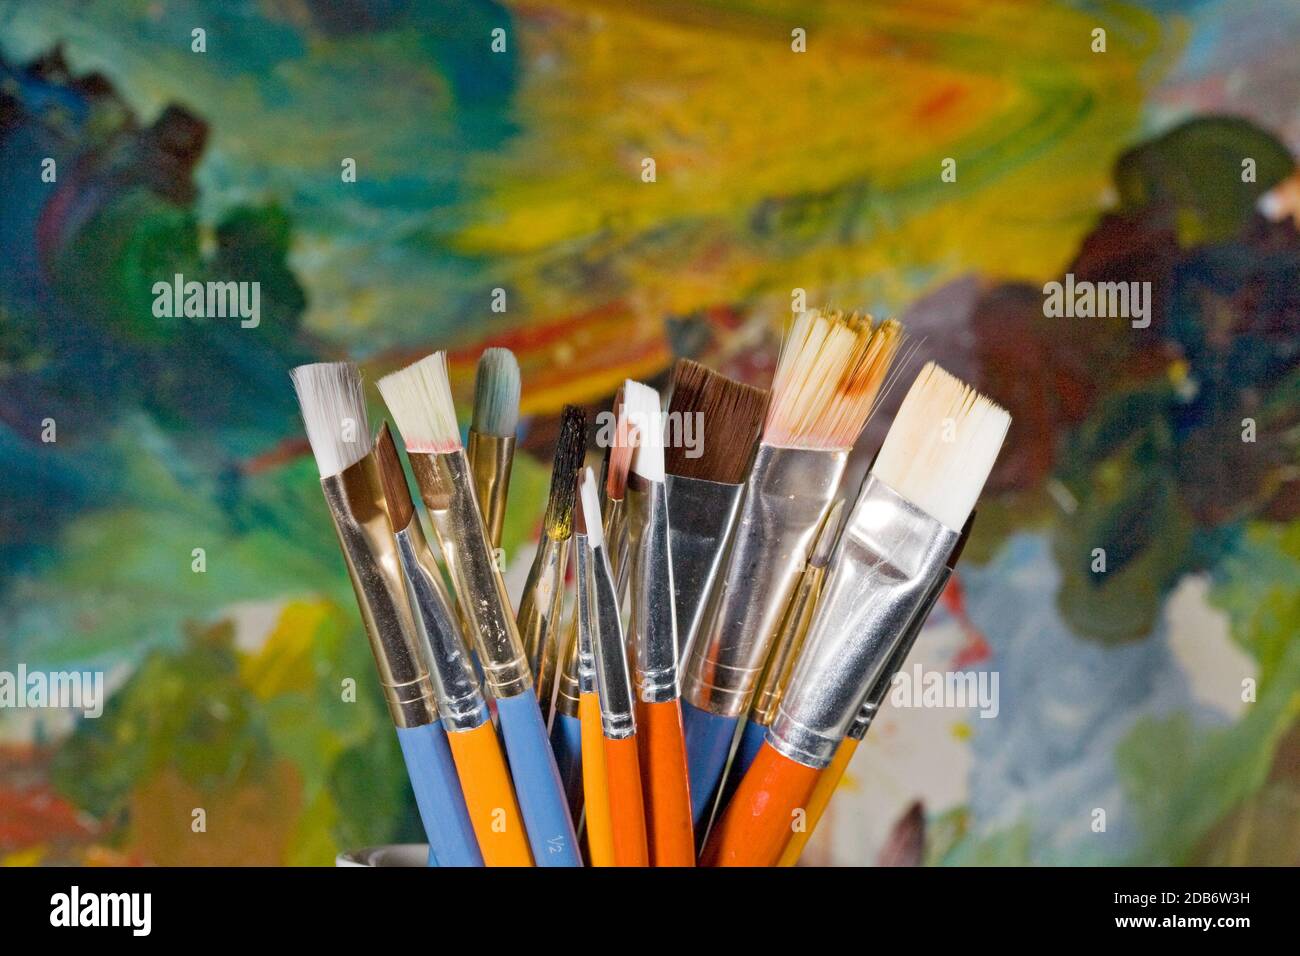 A group of different sized artist paintbrushes in a brightly colored holder in front of the painter's palette. Stock Photo